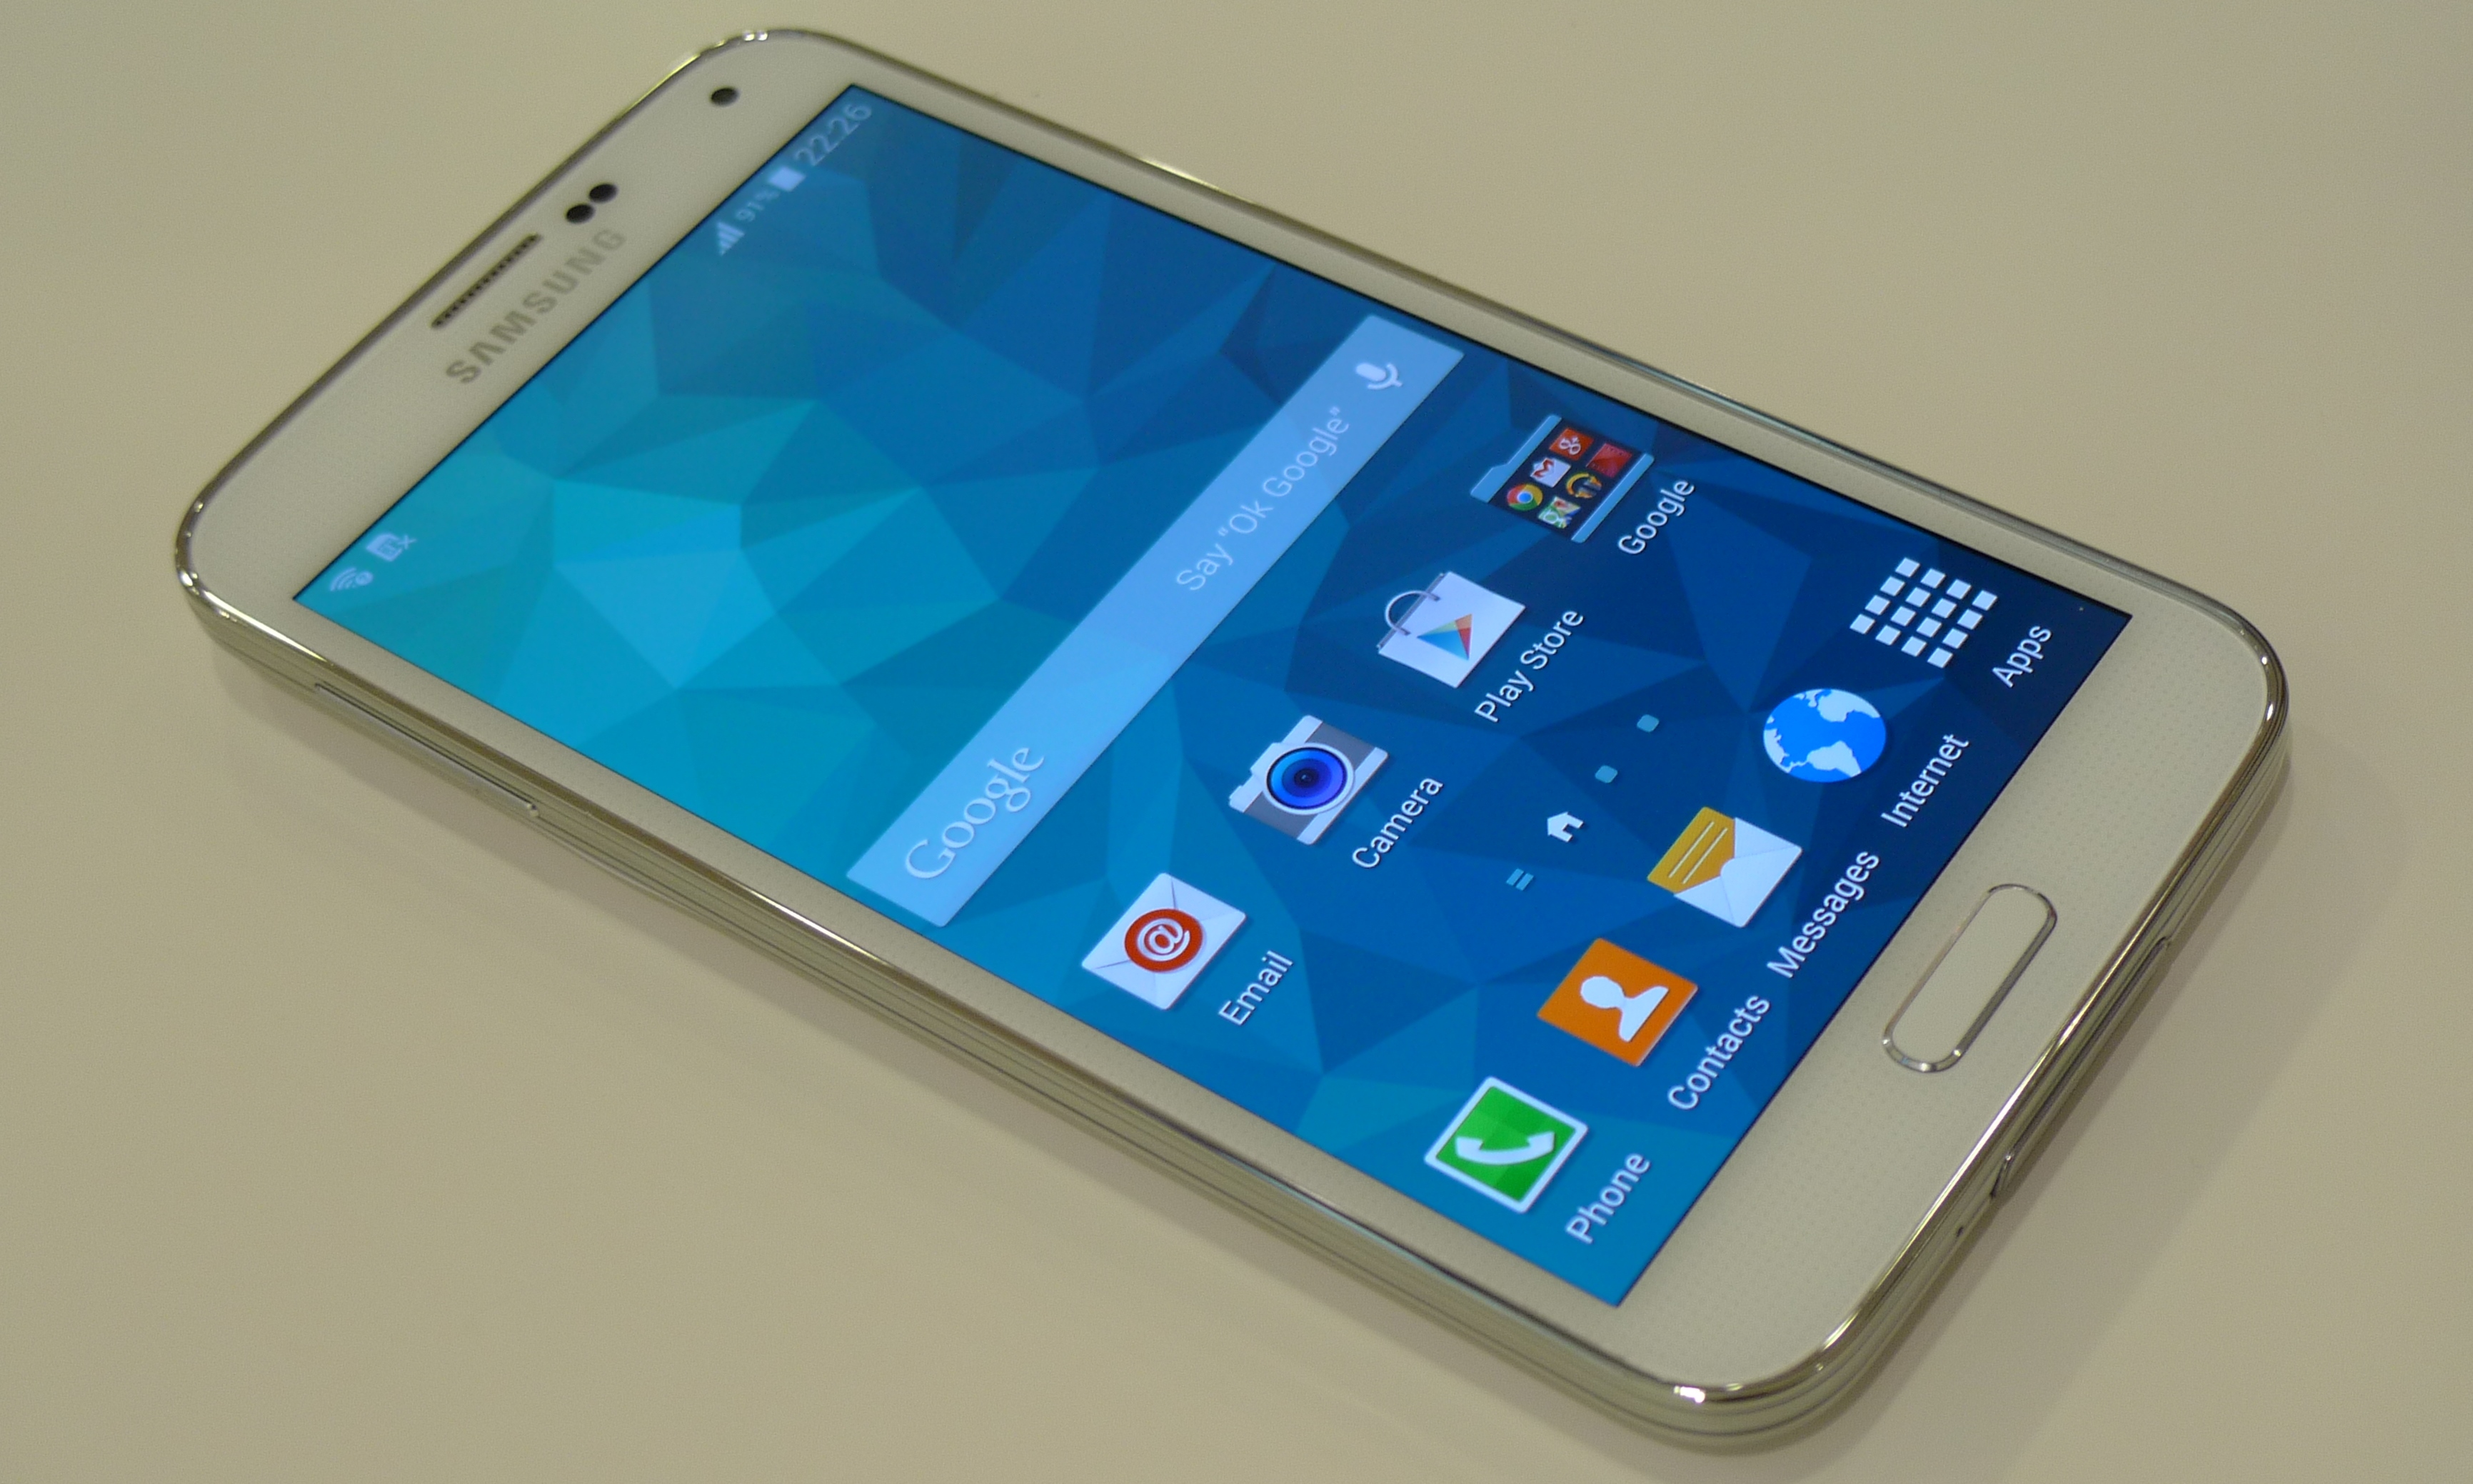 Samsung Galaxy S5 is Receiving MarshMallow